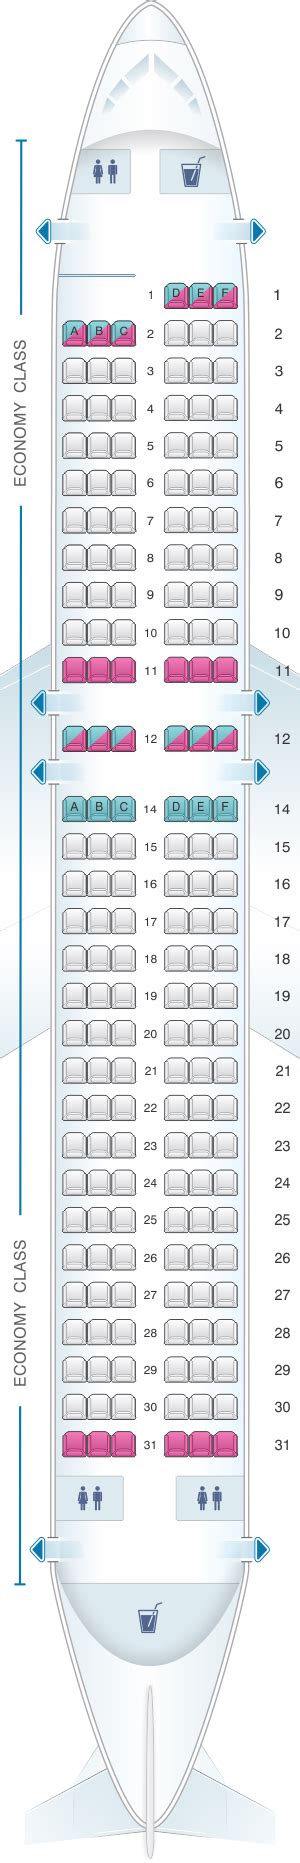 View the seat map and seating details of Allegiant Air Airbus A320, a low-cost airline that offers non-stop flights to various destinations. Read user reviews and ratings of the seats, legroom, recline and service on this plane.